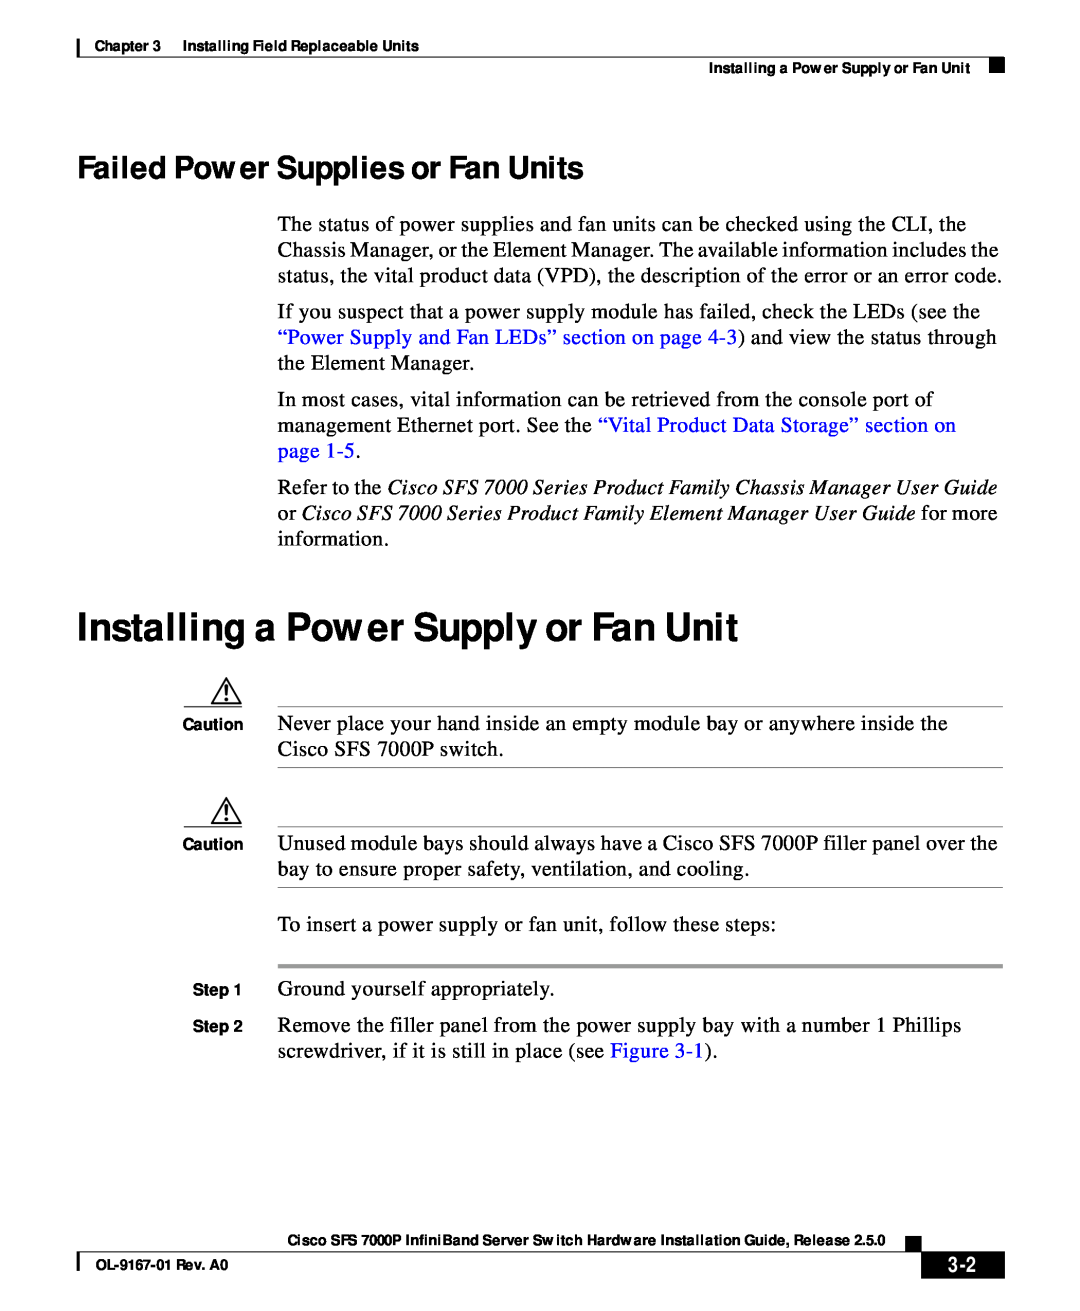 Cisco Systems SFS 7000P manual Installing a Power Supply or Fan Unit, Failed Power Supplies or Fan Units 